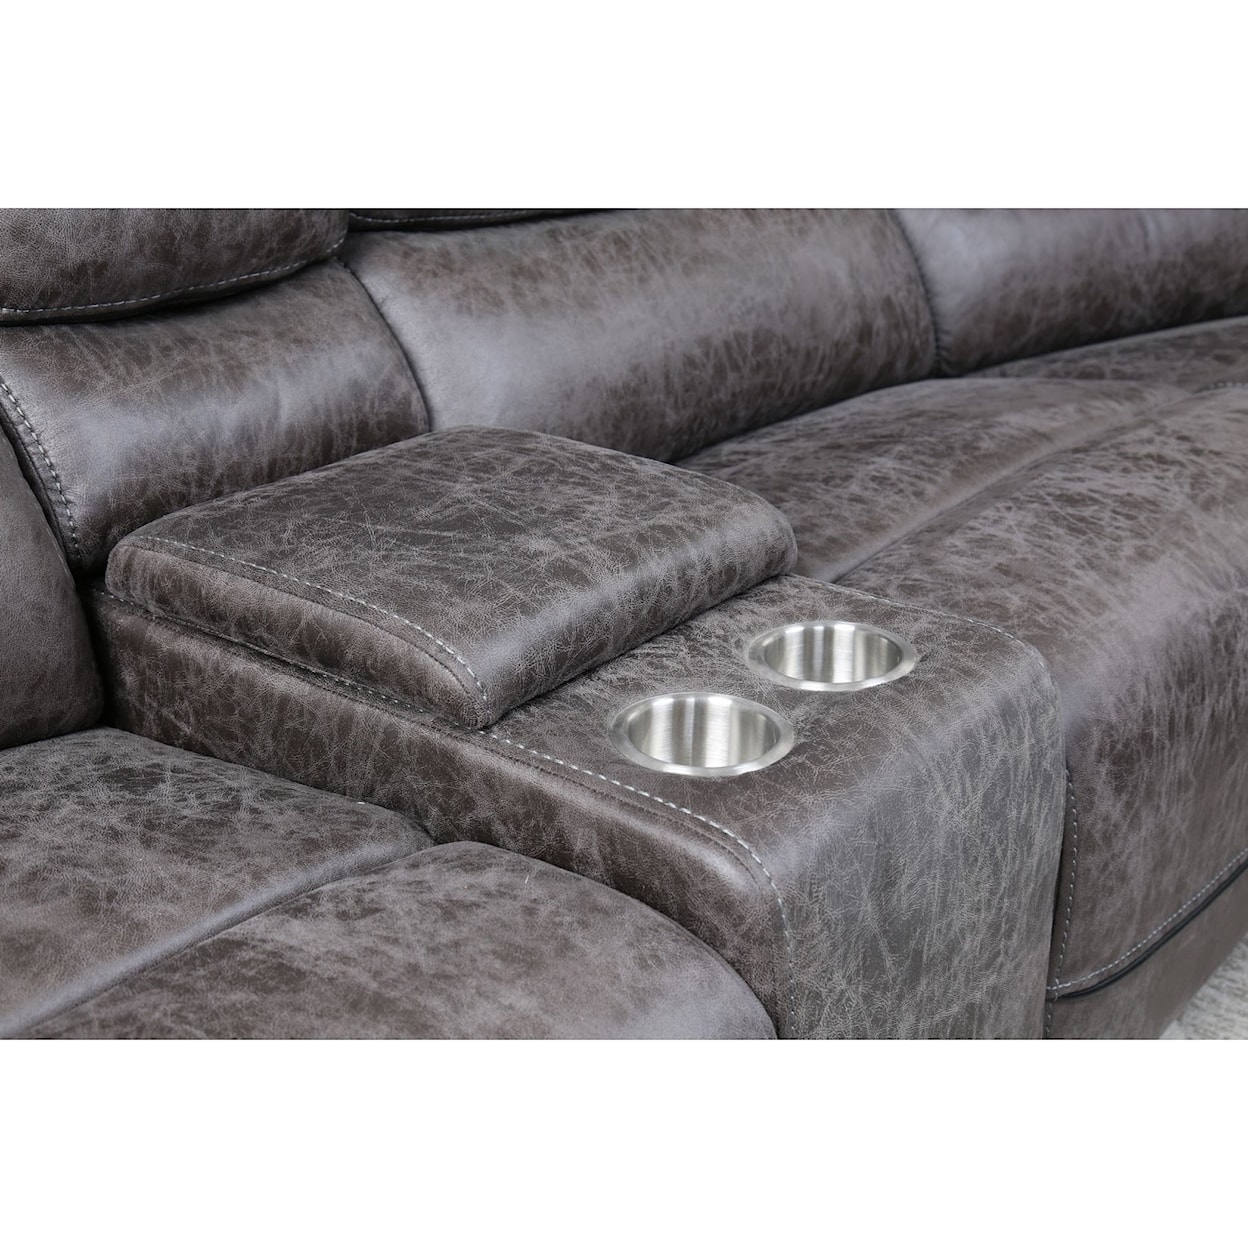 Prime Plaza Reclining Sectional Sofa